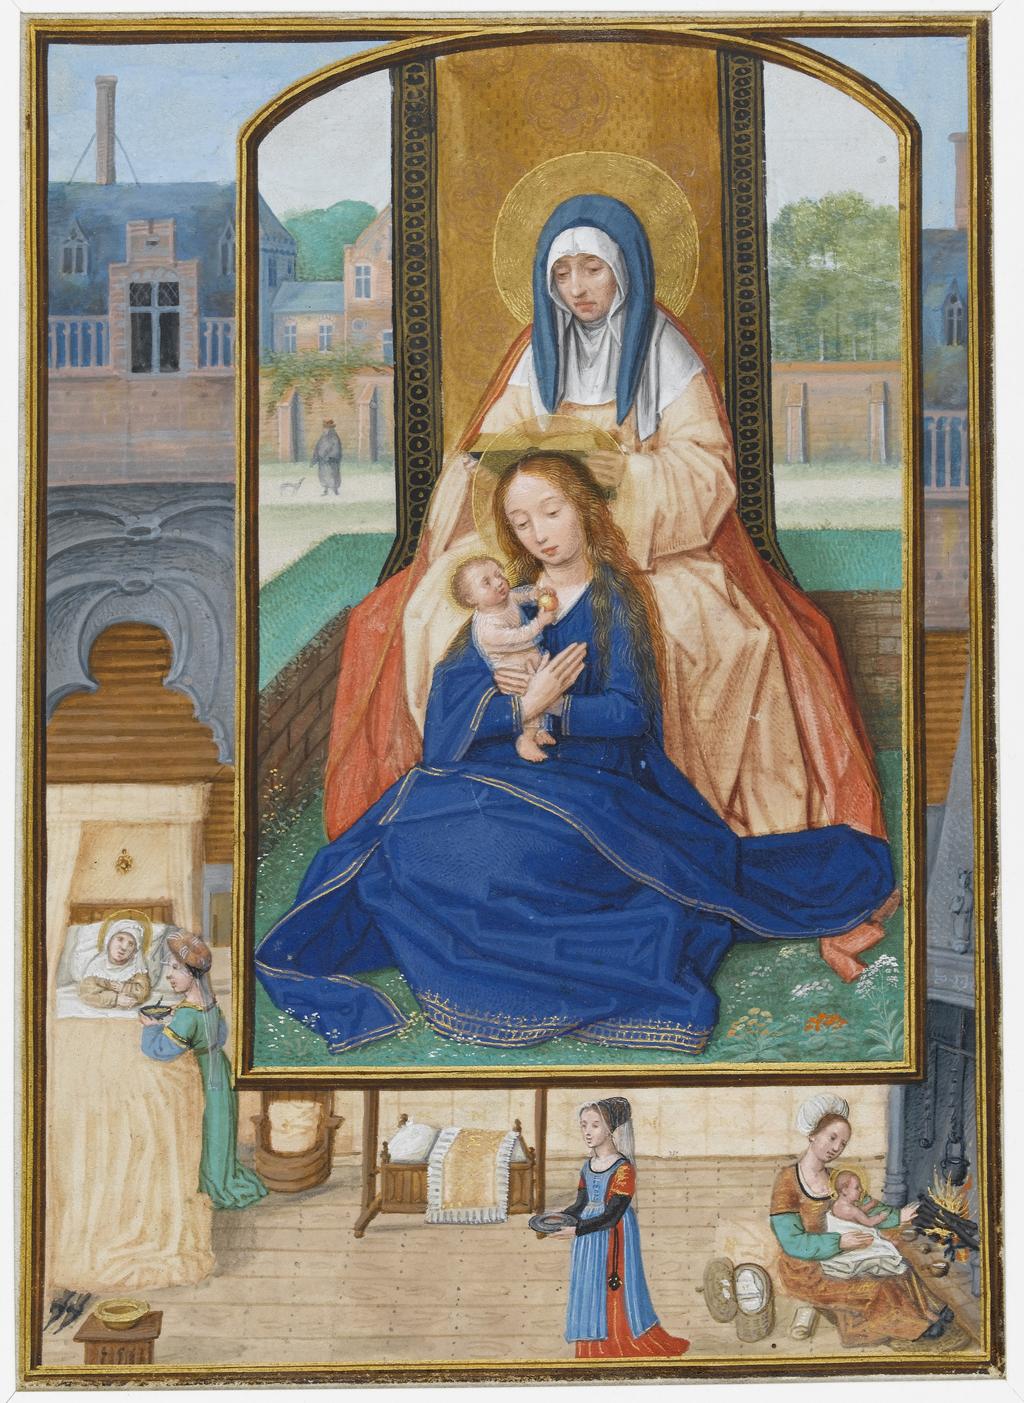 An image of Illuminated Manuscript. Miniature from the Hours of Albrecht of Brandenburg. Suffrage to St Anne. St Anne, the Virgin and Child in a garden. Nativity of the Virgin in border. Simon Bening (Flemish, 1483-1561). Parchment, gold, six leaves with closely trimmed margins, framed illuminated area 175 x 125 mm, no text or ruling on reverse, 1522-1523. Production Place: Bruges, Flanders.